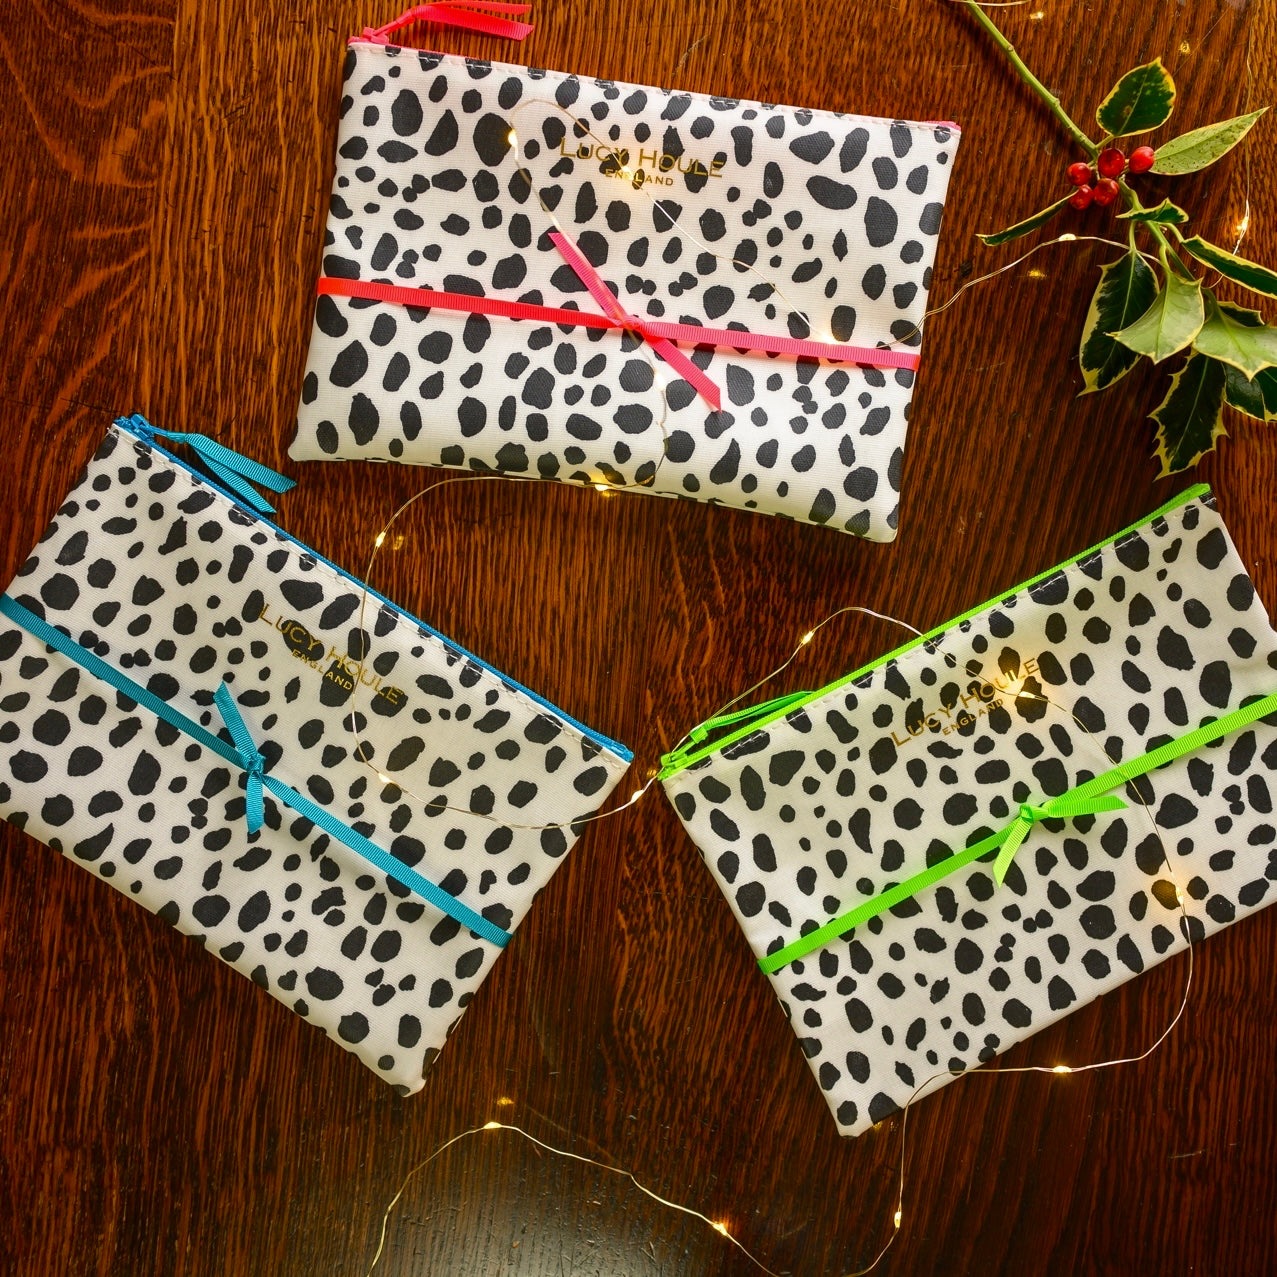 Dalmatian Make-Up Bag with Turquoise Zip